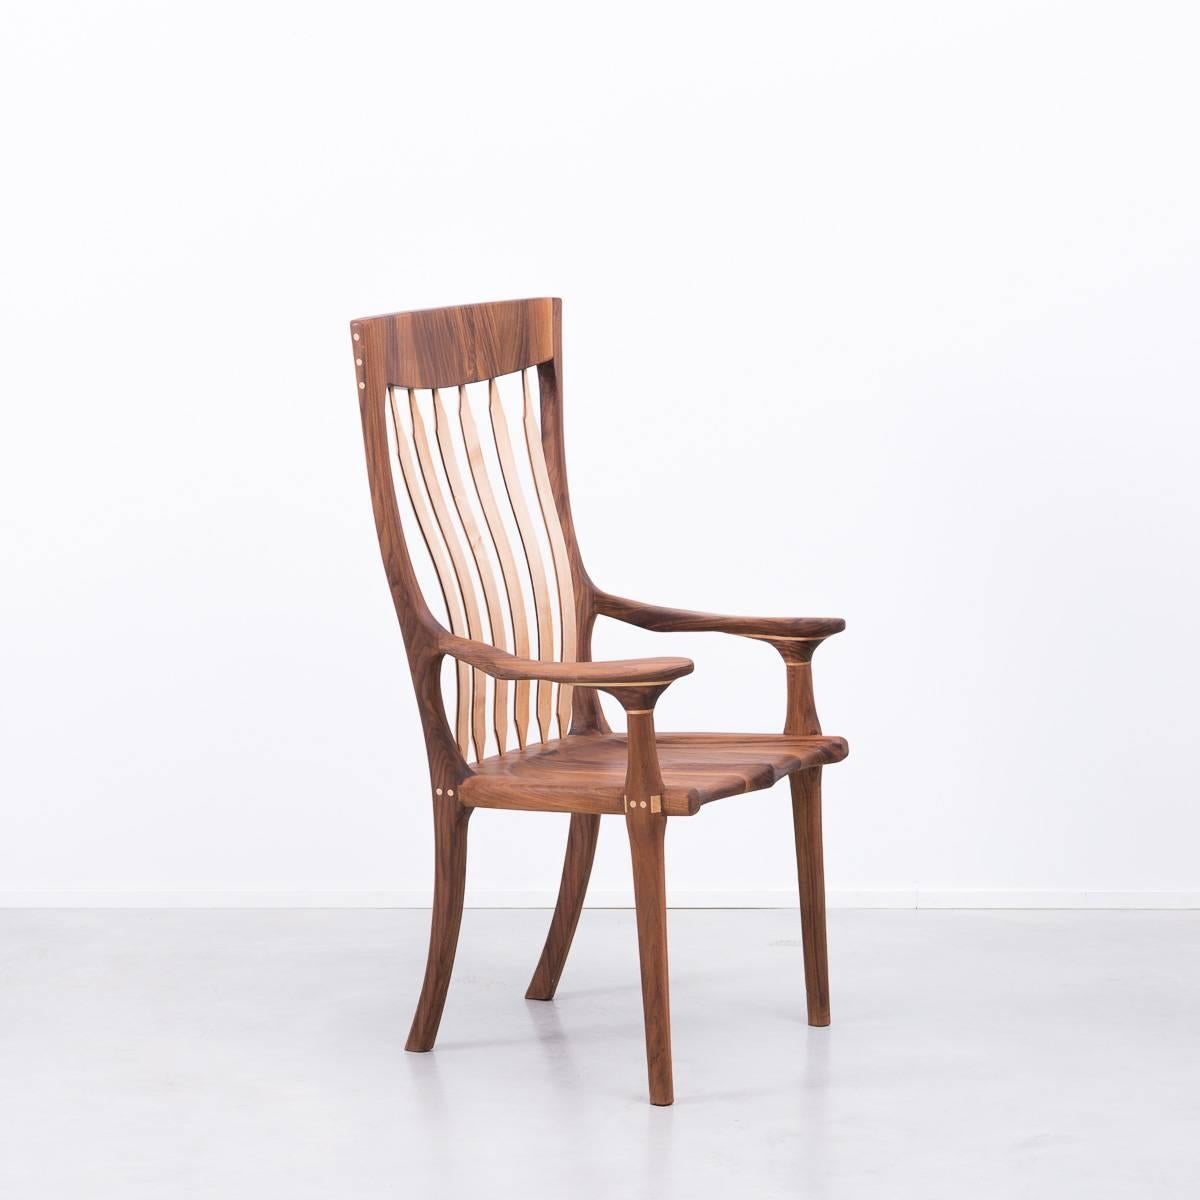 A large hall chair of exceptional quality inspired by the designs of Sam Maloof. Little is known about the maker other than he is a South coast (England) artist who hand made the chair around 20 years ago and sked that his identity not be